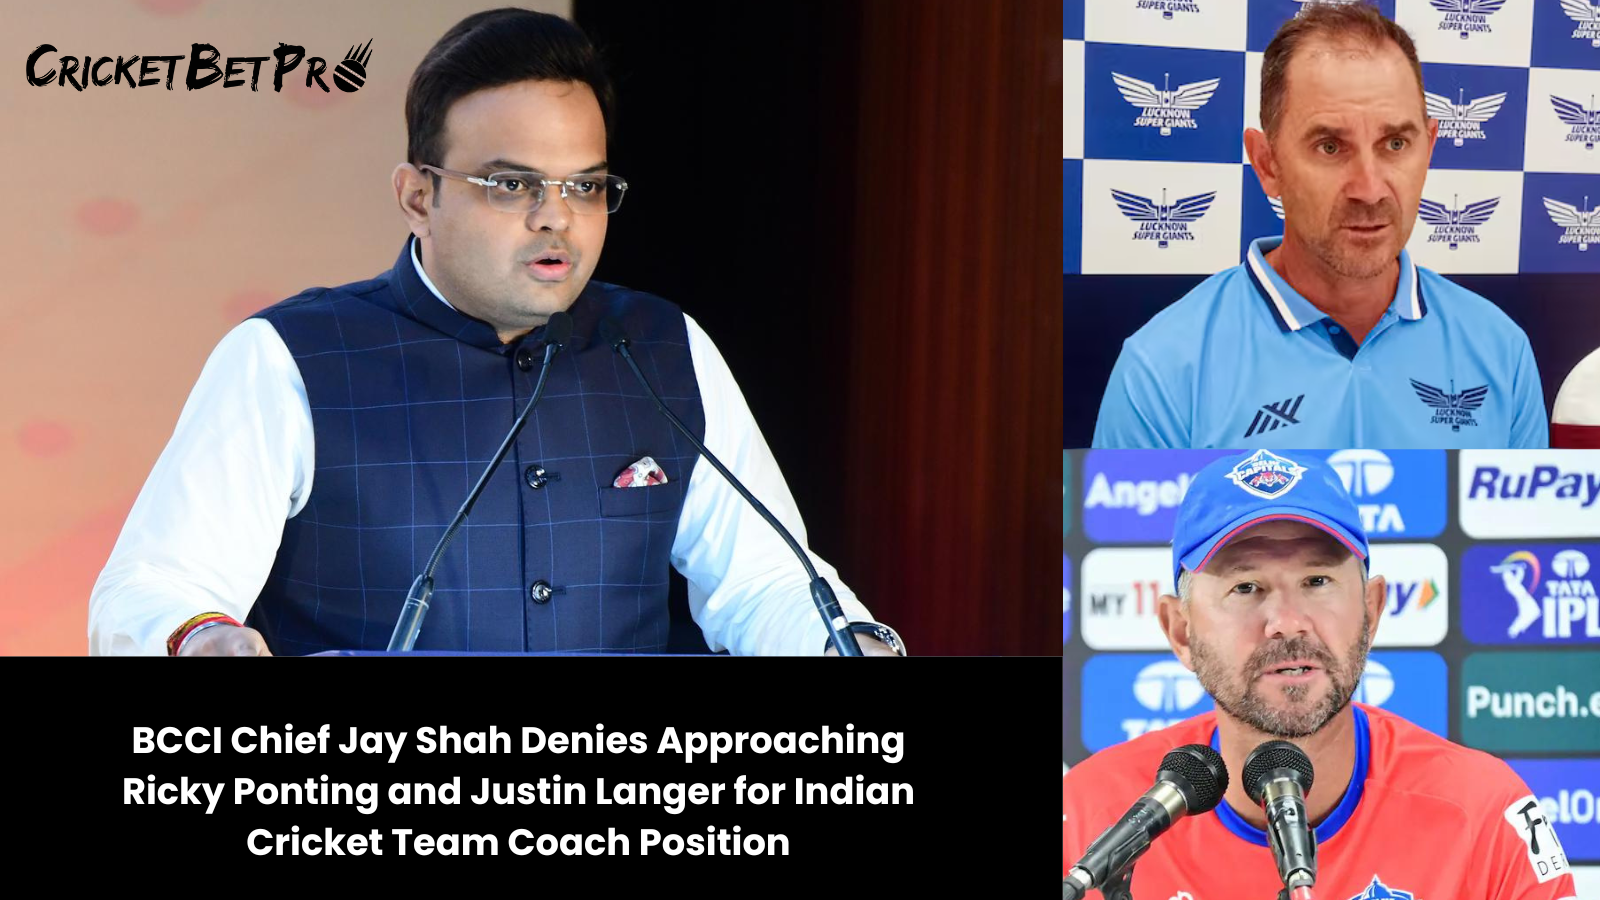 BCCI Chief Jay Shah Denies Approaching Ricky Ponting and Justin Langer for Indian Cricket Team Coach Position